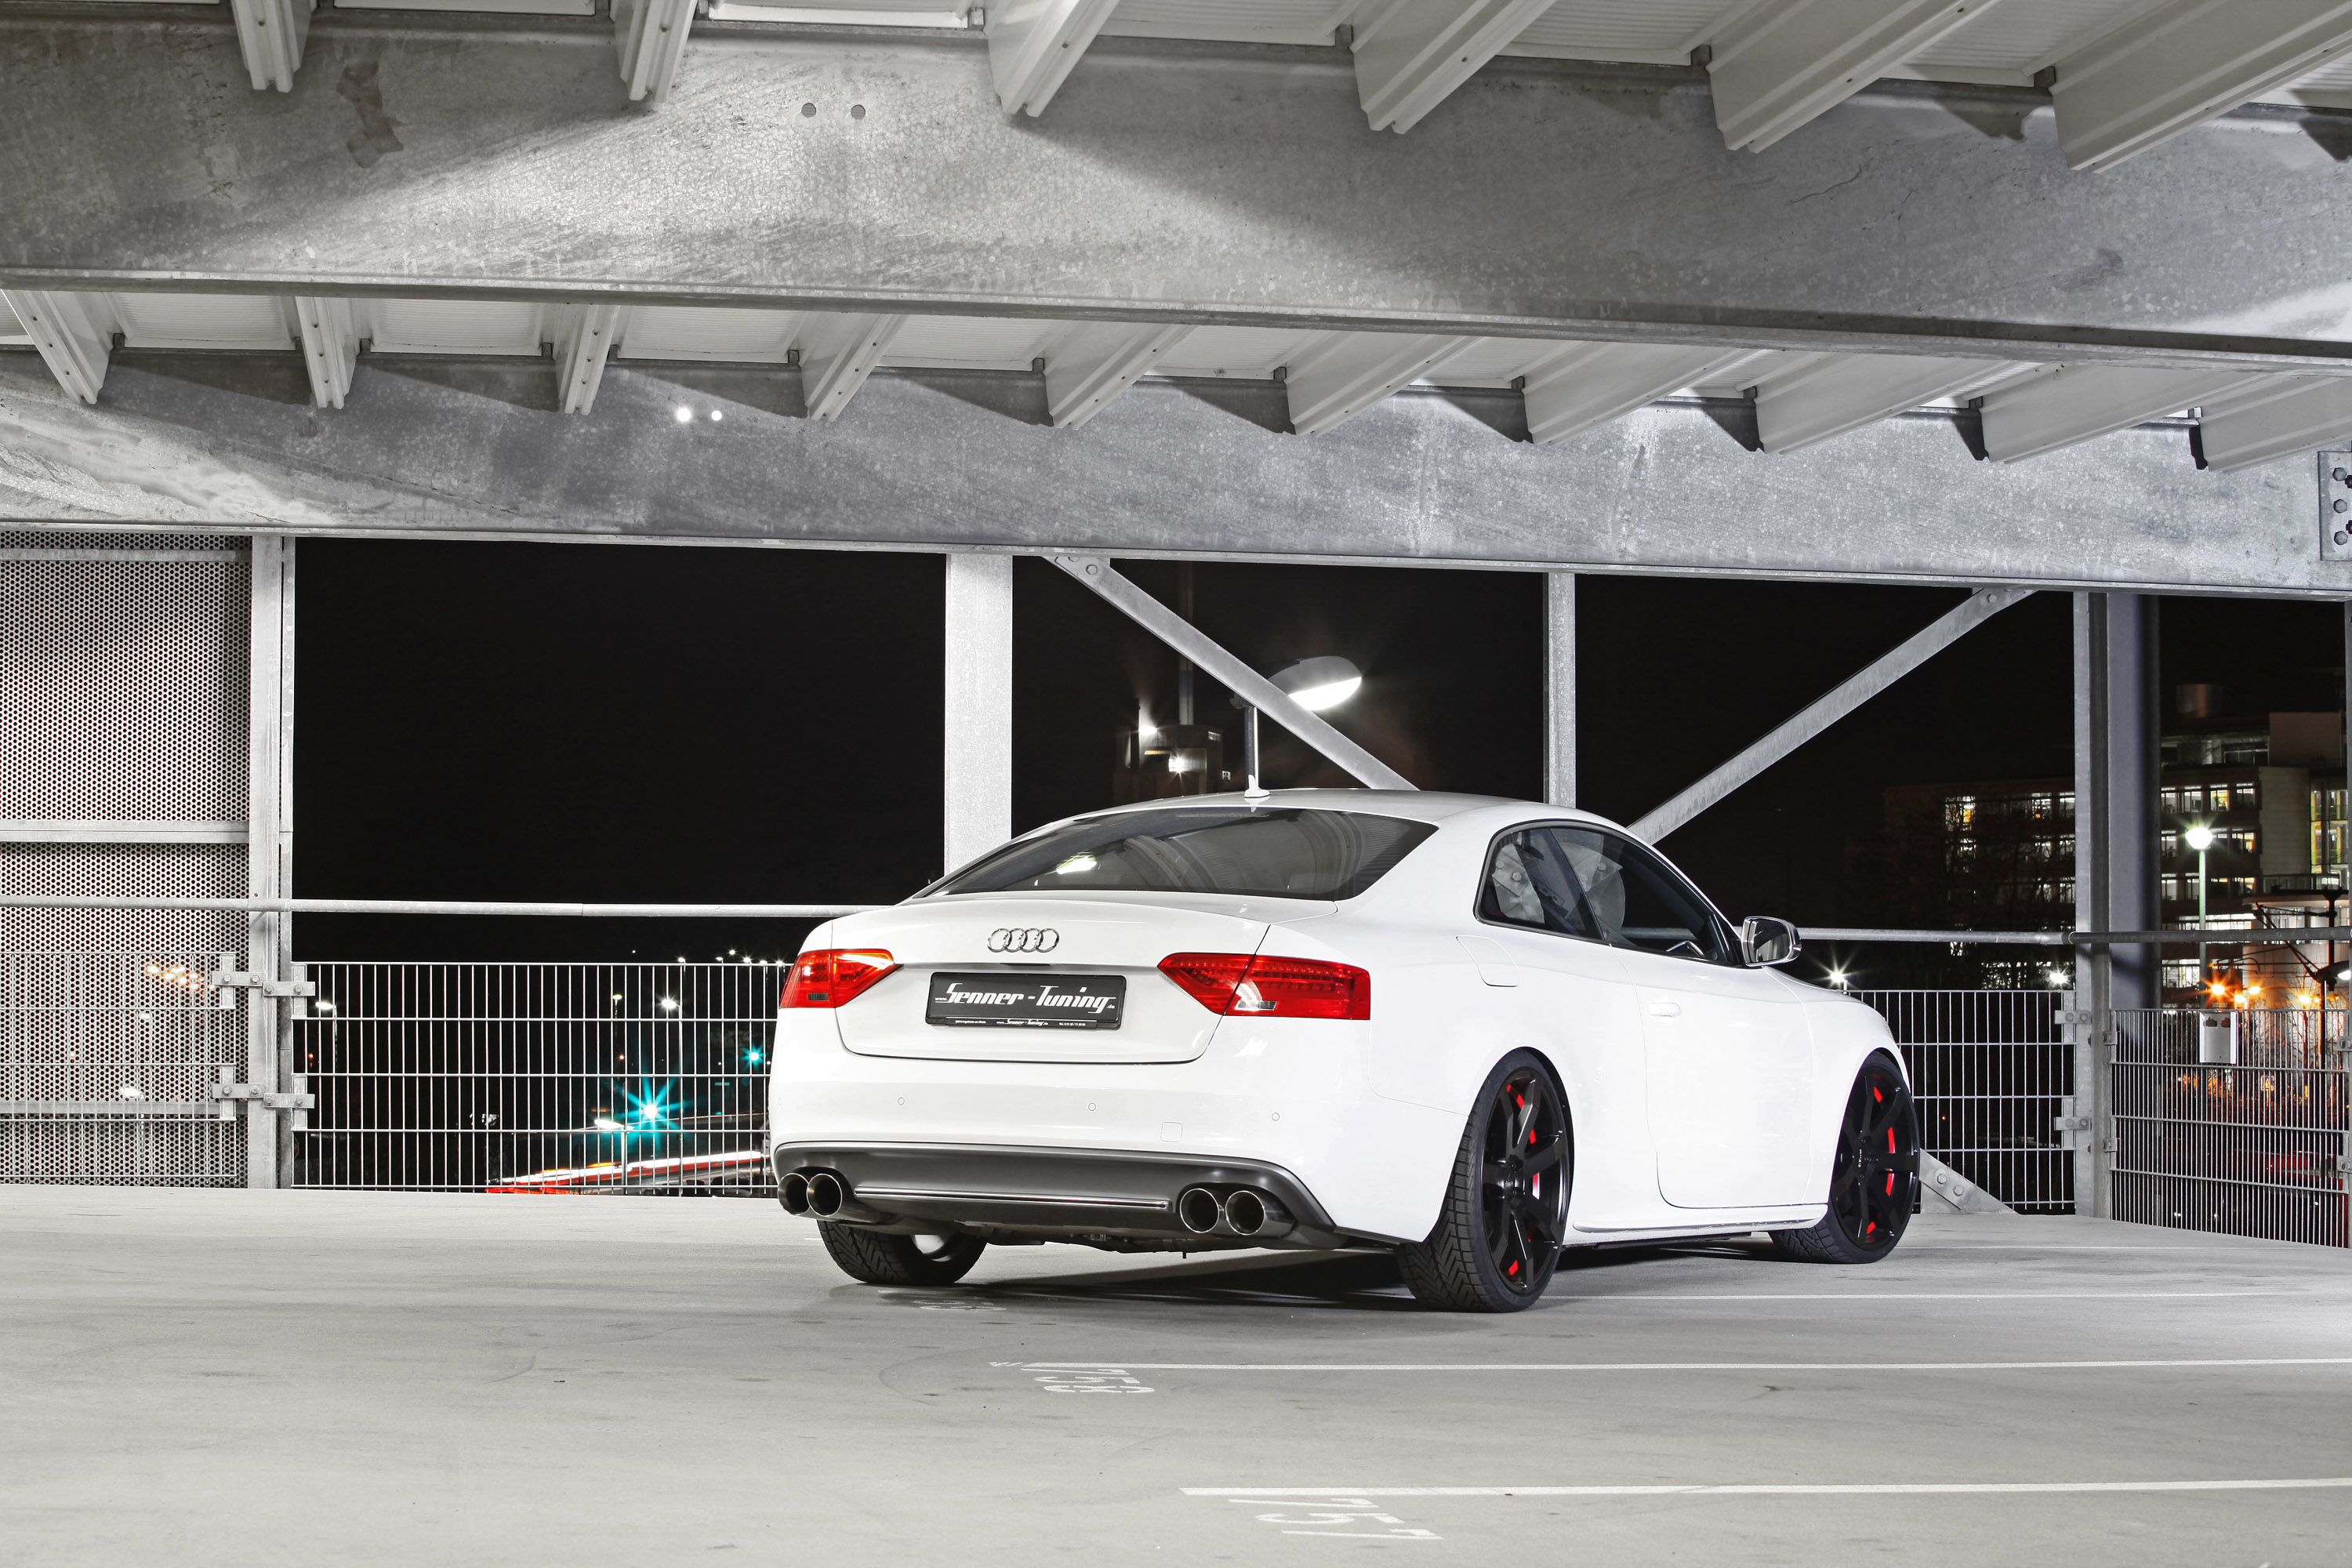 2012, Senner, Audi, S 5, Coupe, Tuning Wallpaper